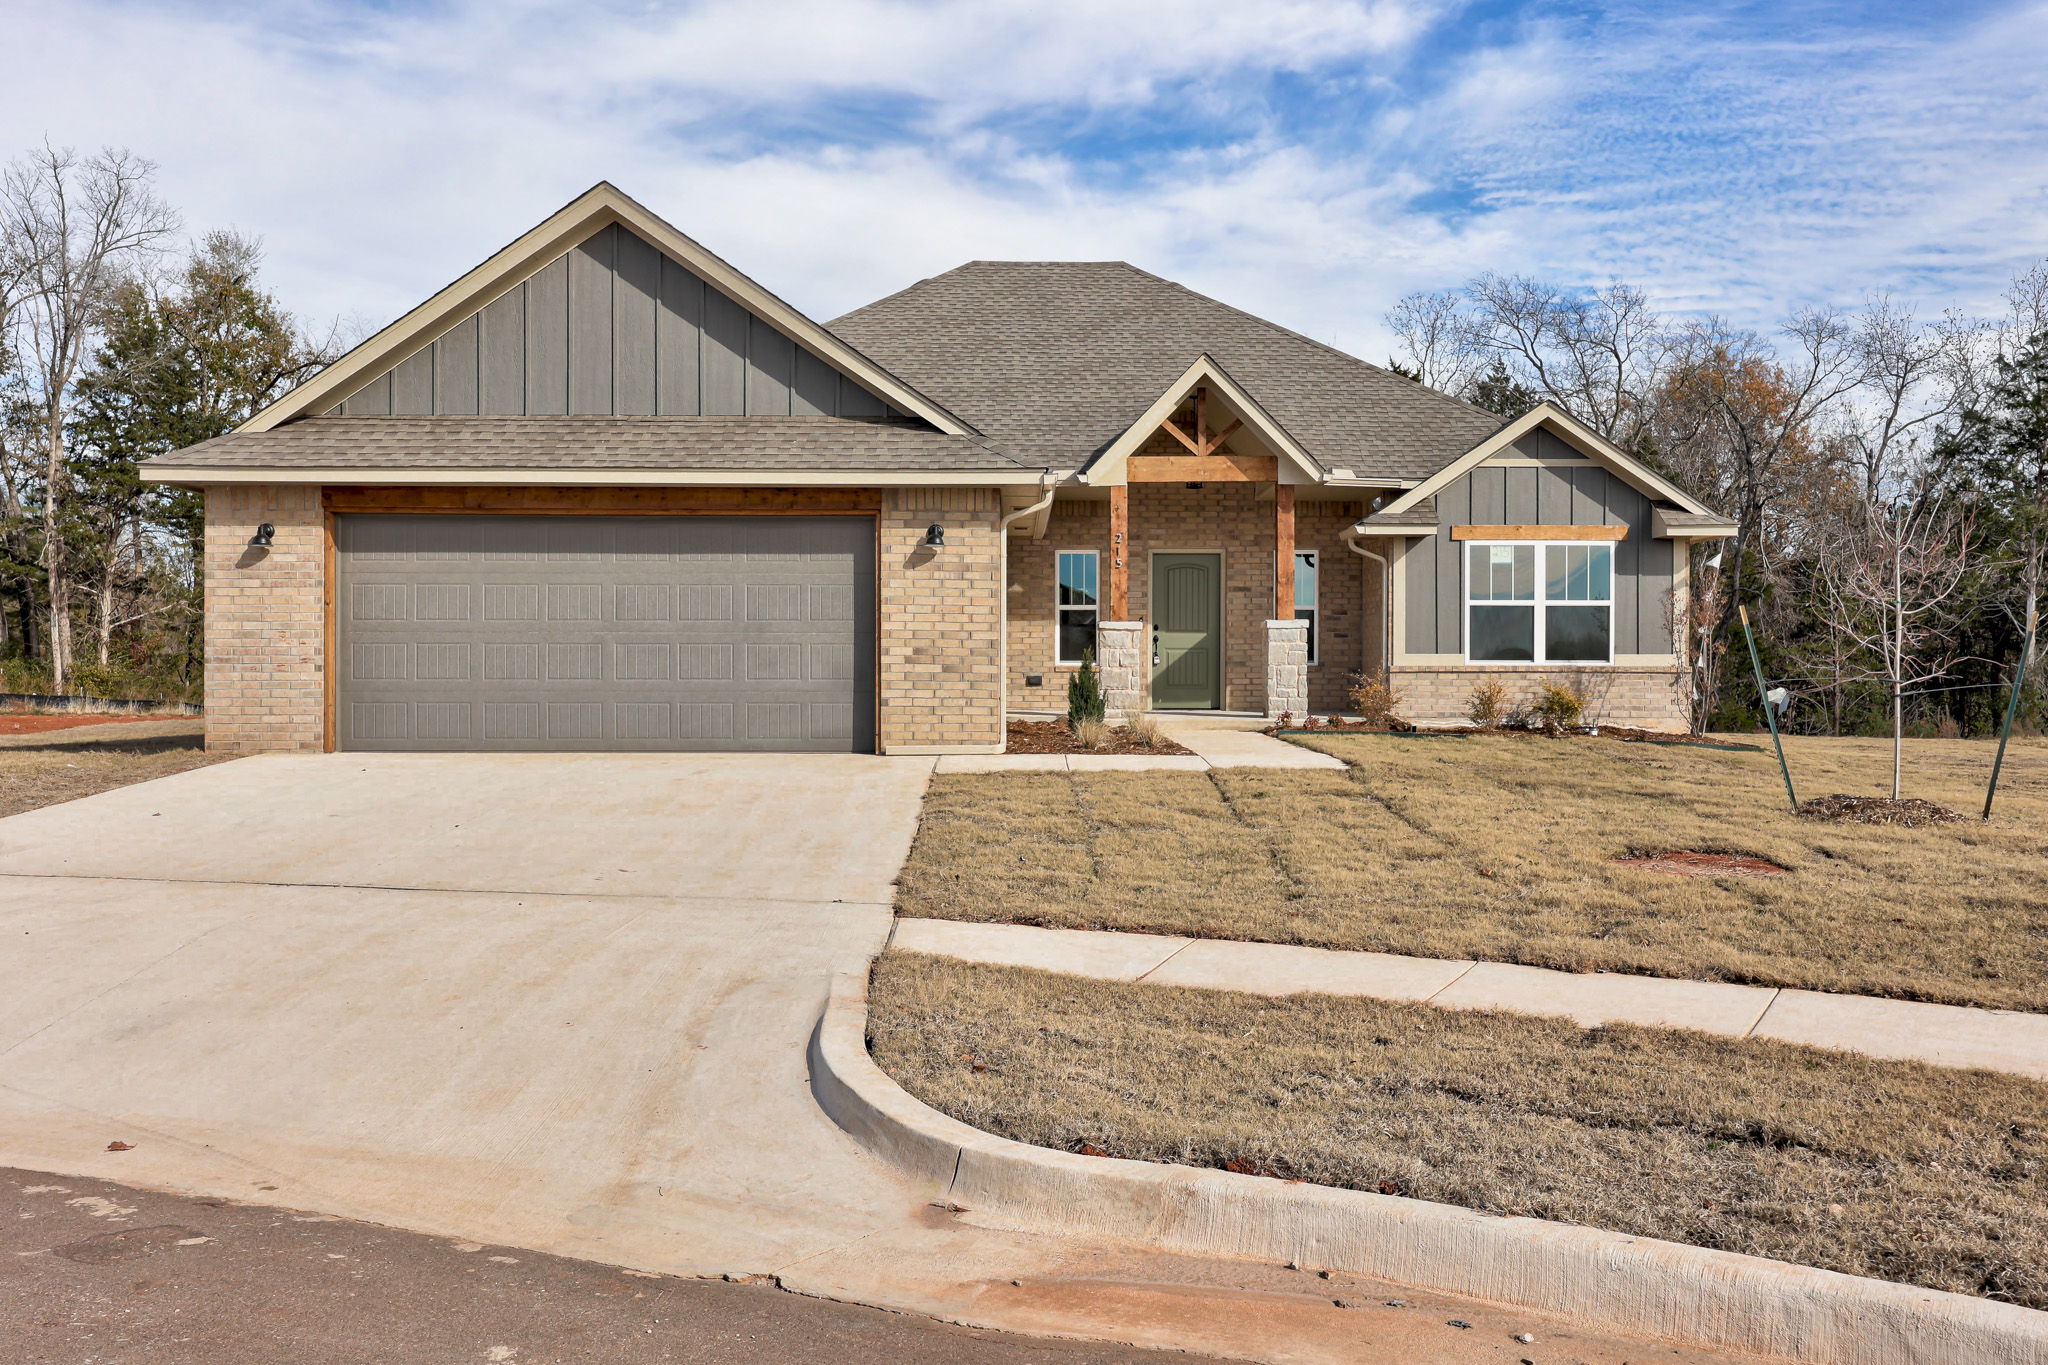 Firethorn Way 215, Noble, Oklahoma 73068, 3 Bedrooms Bedrooms, ,2 BathroomsBathrooms,House,For Sale,215,1420